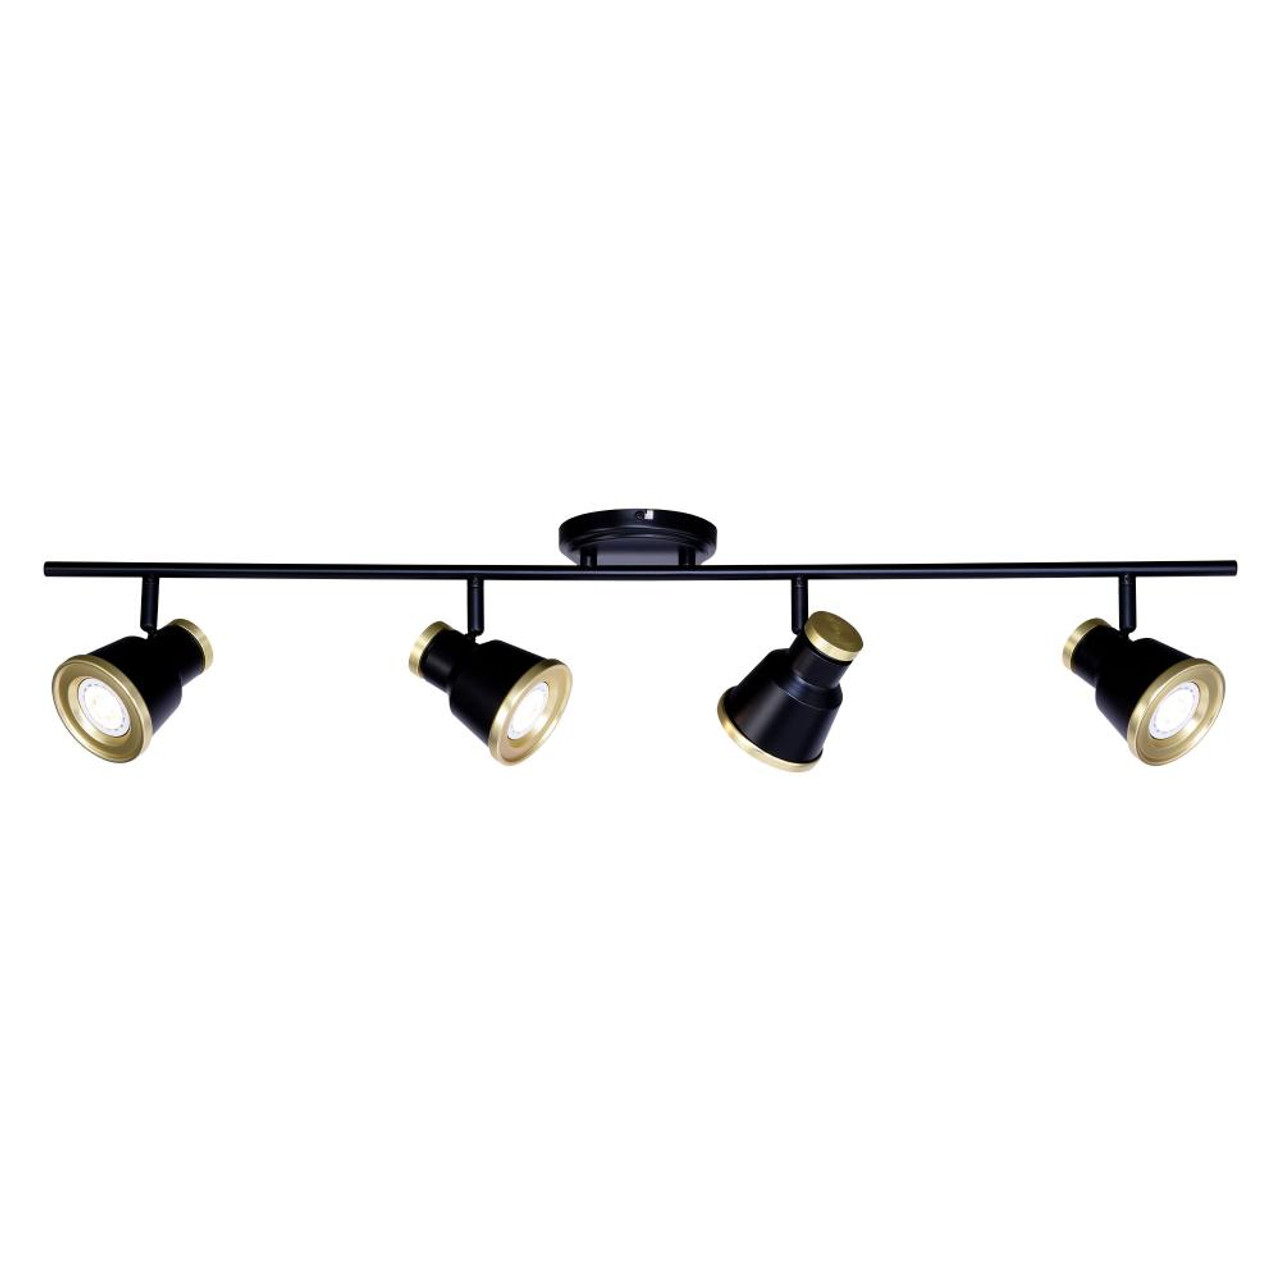 Fairhaven 4L LED Directional Ceiling Light Textured Black and Natural  Brass, Vaxcel International C0208 J3V0 Vaxcel International Other  Directional Light